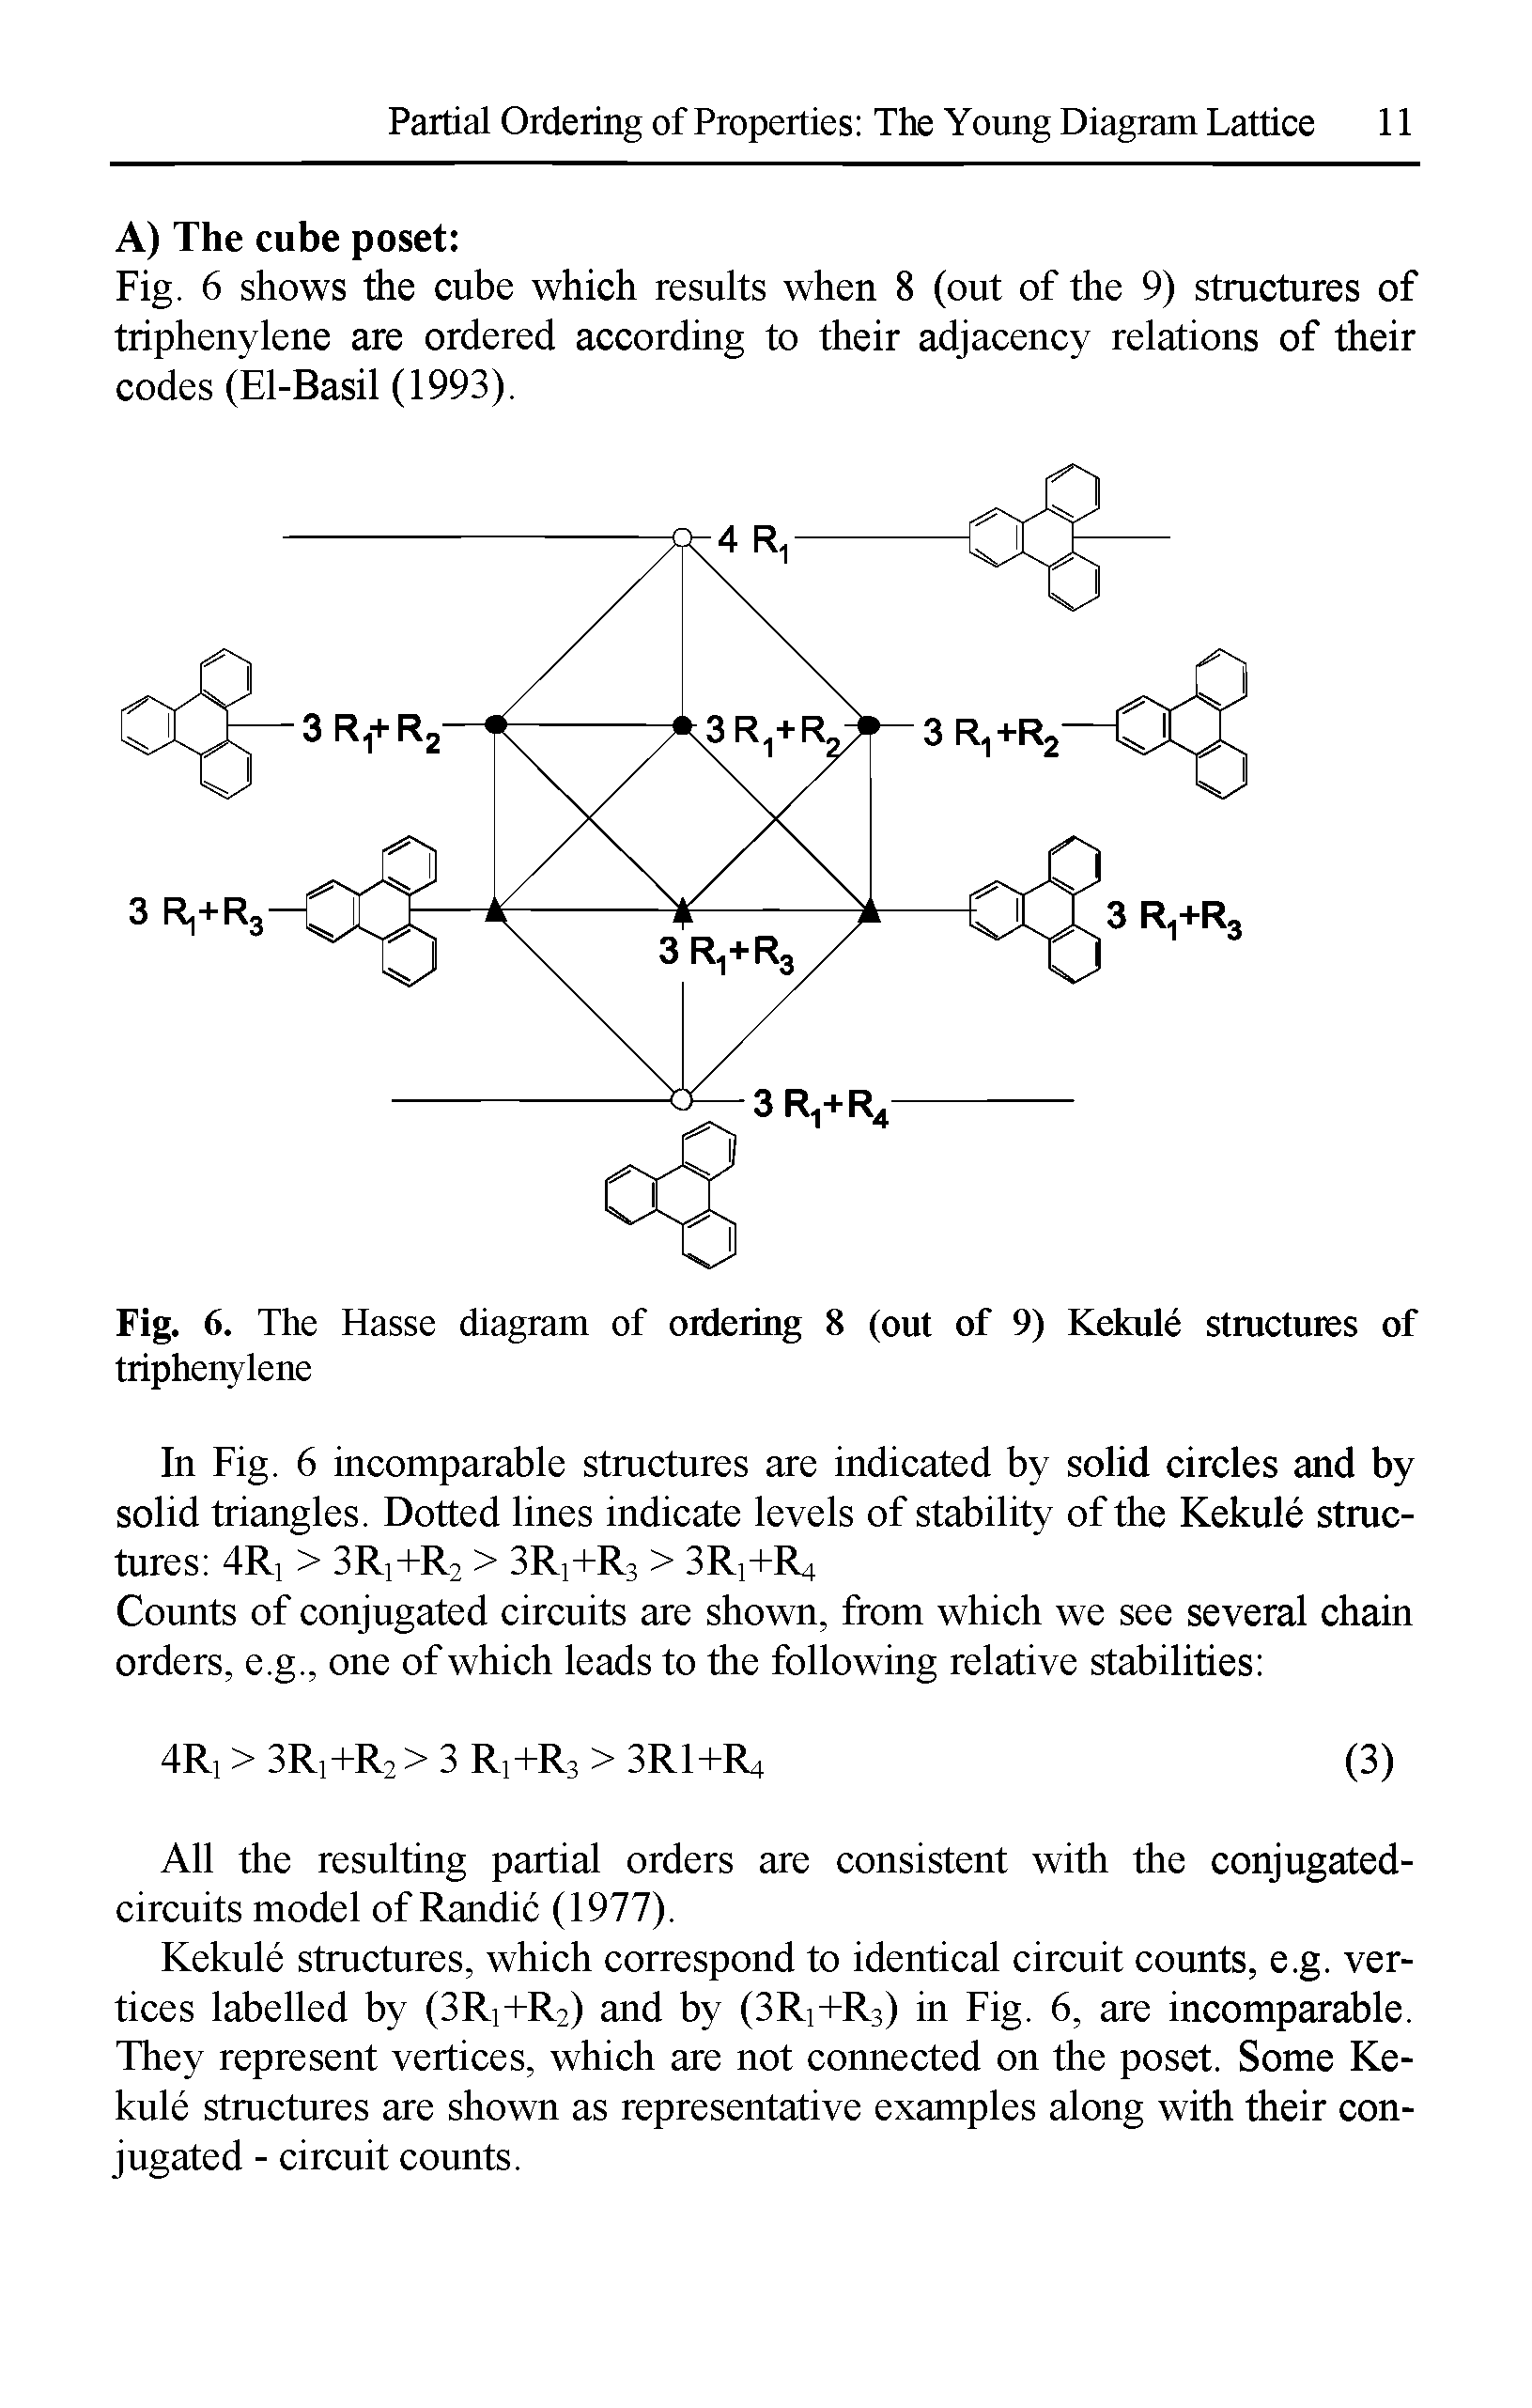 Fig. 6. The Hasse diagram of ordering 8 (out of 9) Kekule structures of triphenylene...